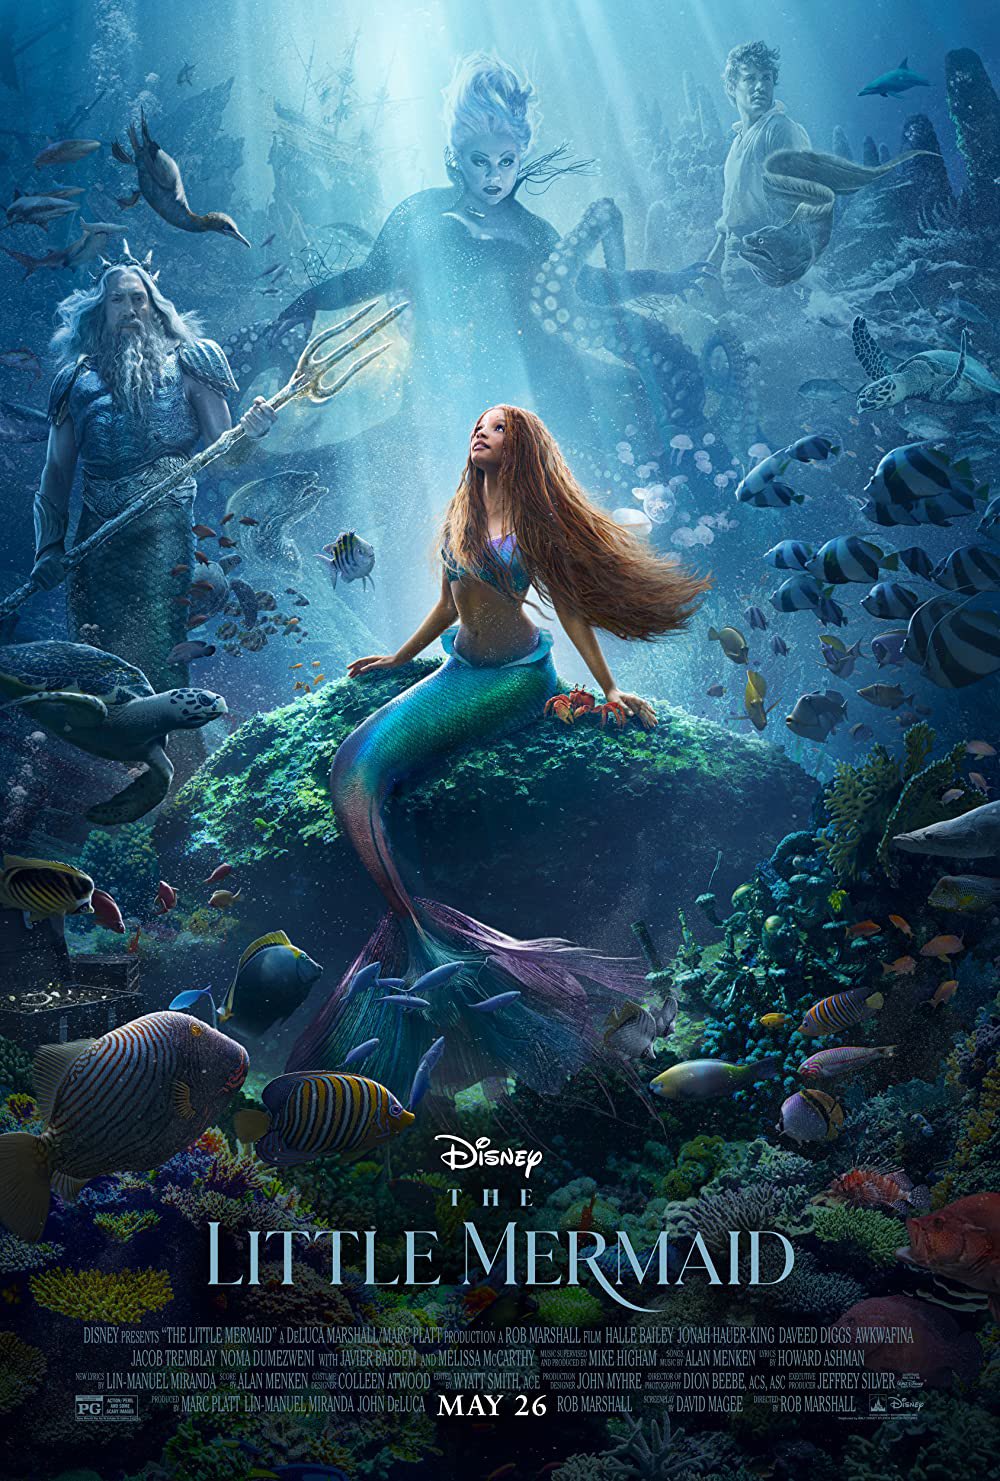 Experience the Enchanting Journey of The Little Mermaid (2023) in this Epic Live-Action Adaptation!